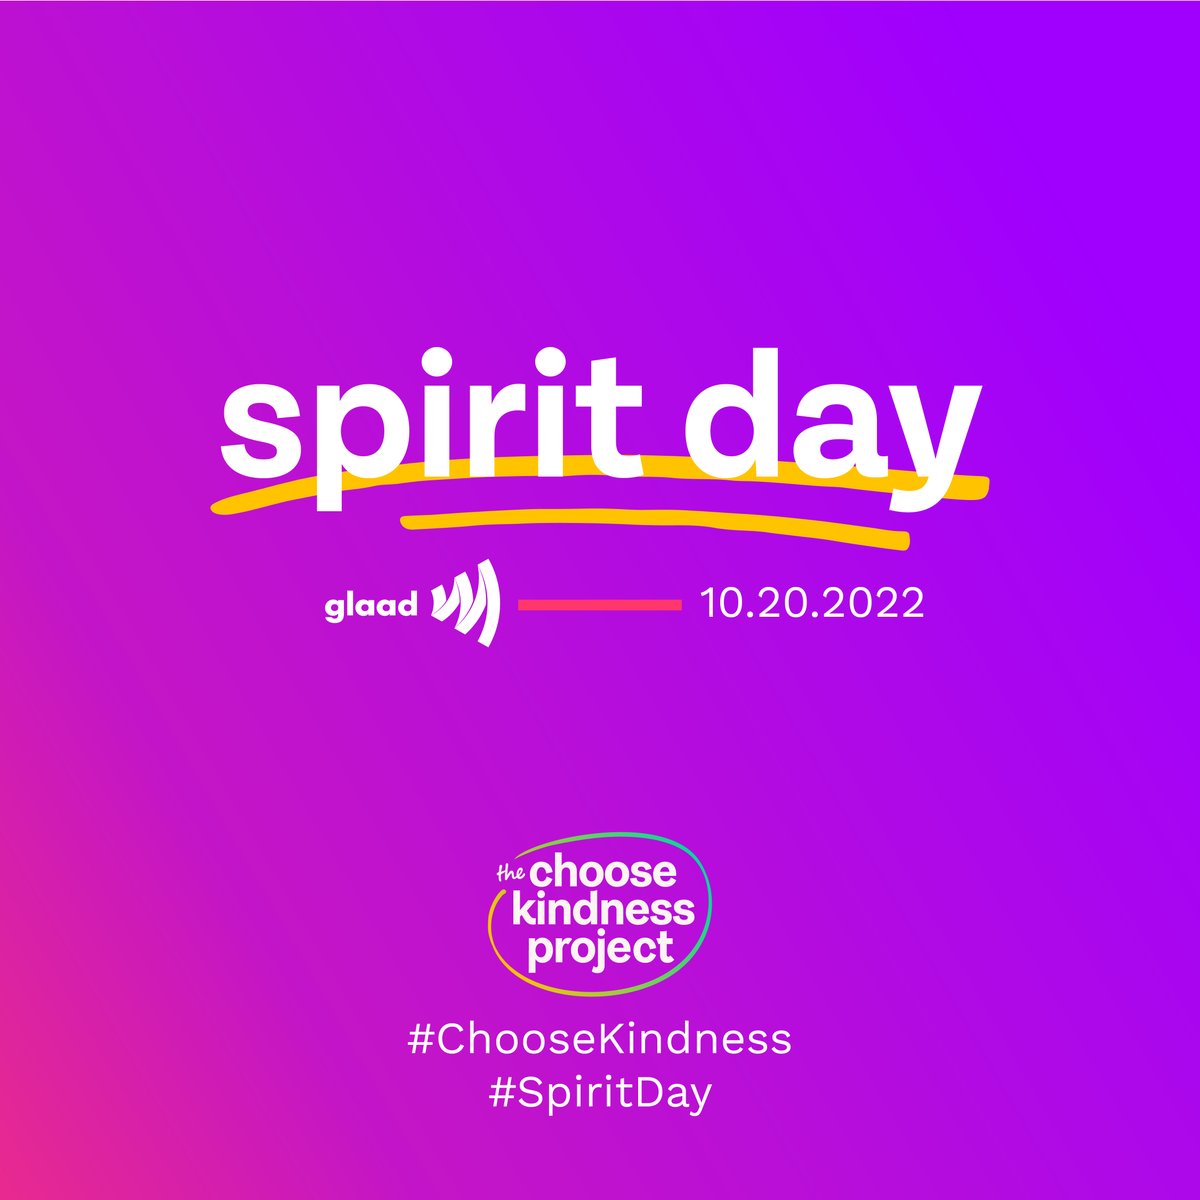 On #SpiritDay we stand against bullying and show support for LGBTQ youth. Go purple now and #ChooseKindness 💜 glaad.org/spiritday